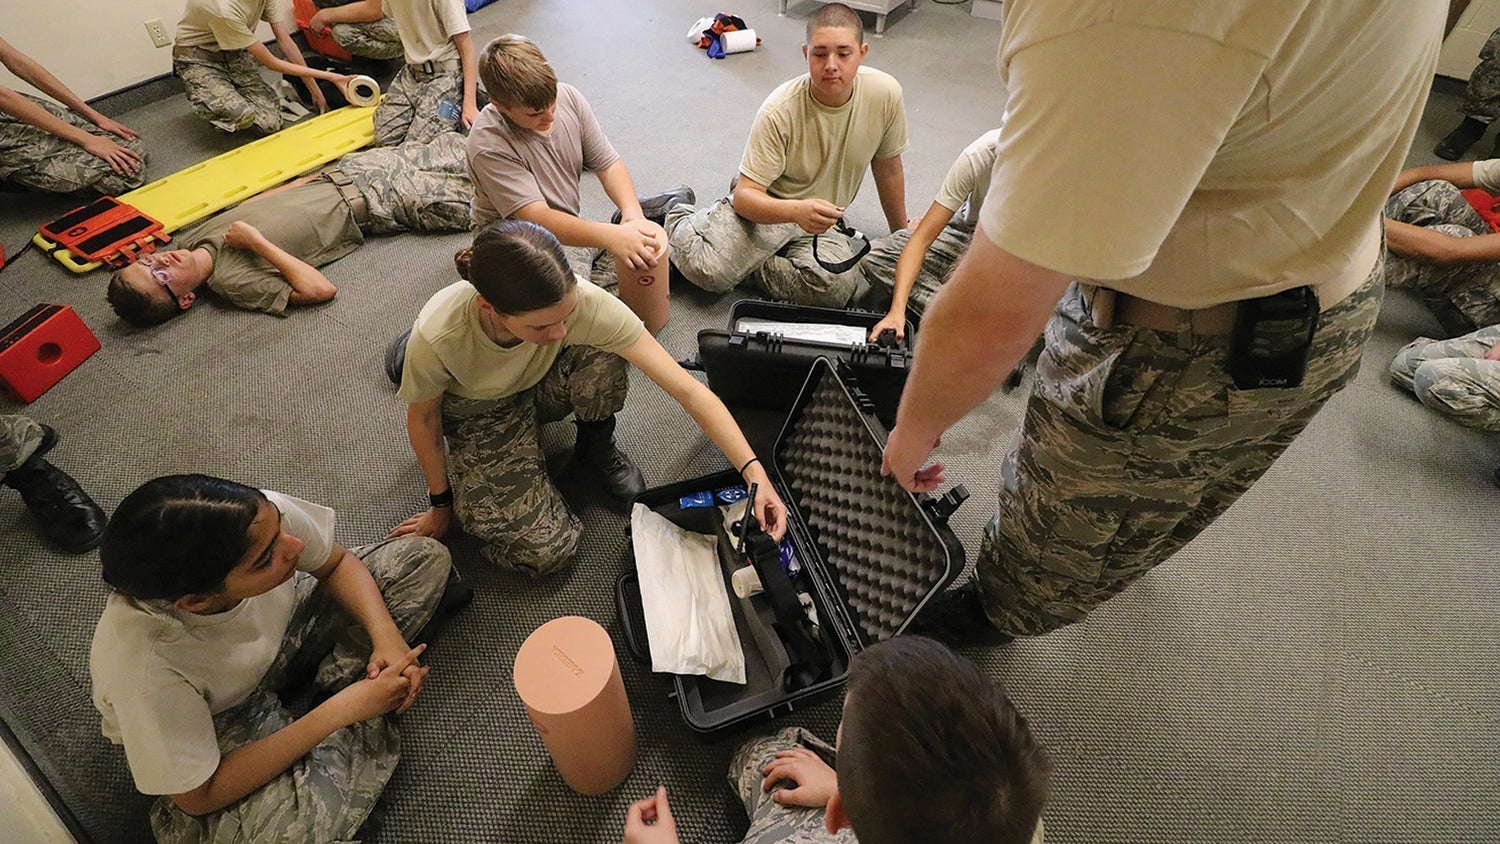 At Fort Huachuca, Arizona, Civil Air Patrol cadets learn how to ready wounded troops for transport. (Credit: Civil Air Patrol/2nd Lt. Mitch Smith)